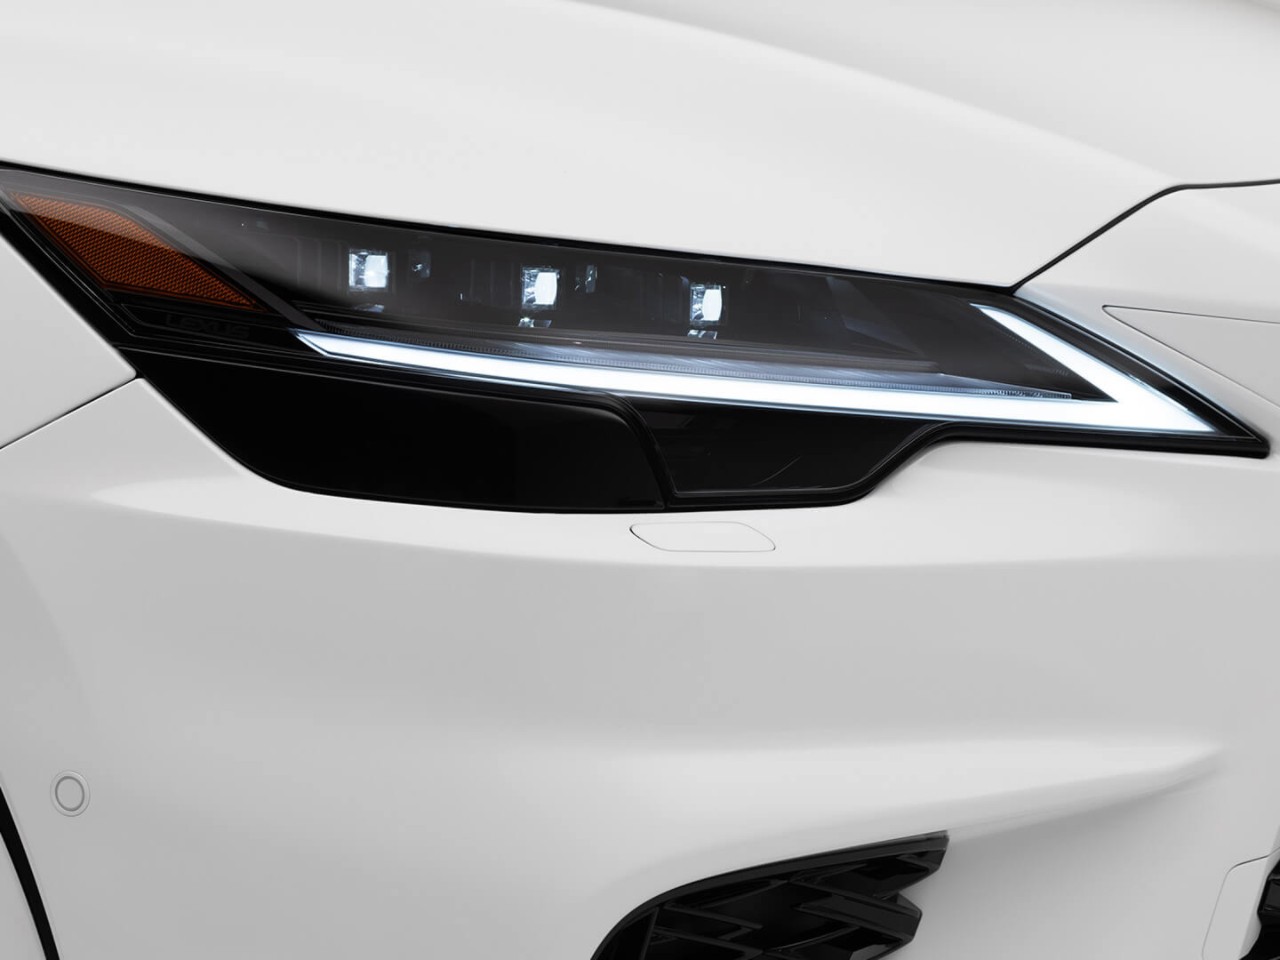 Close-up of the Lexus RX LED headlights